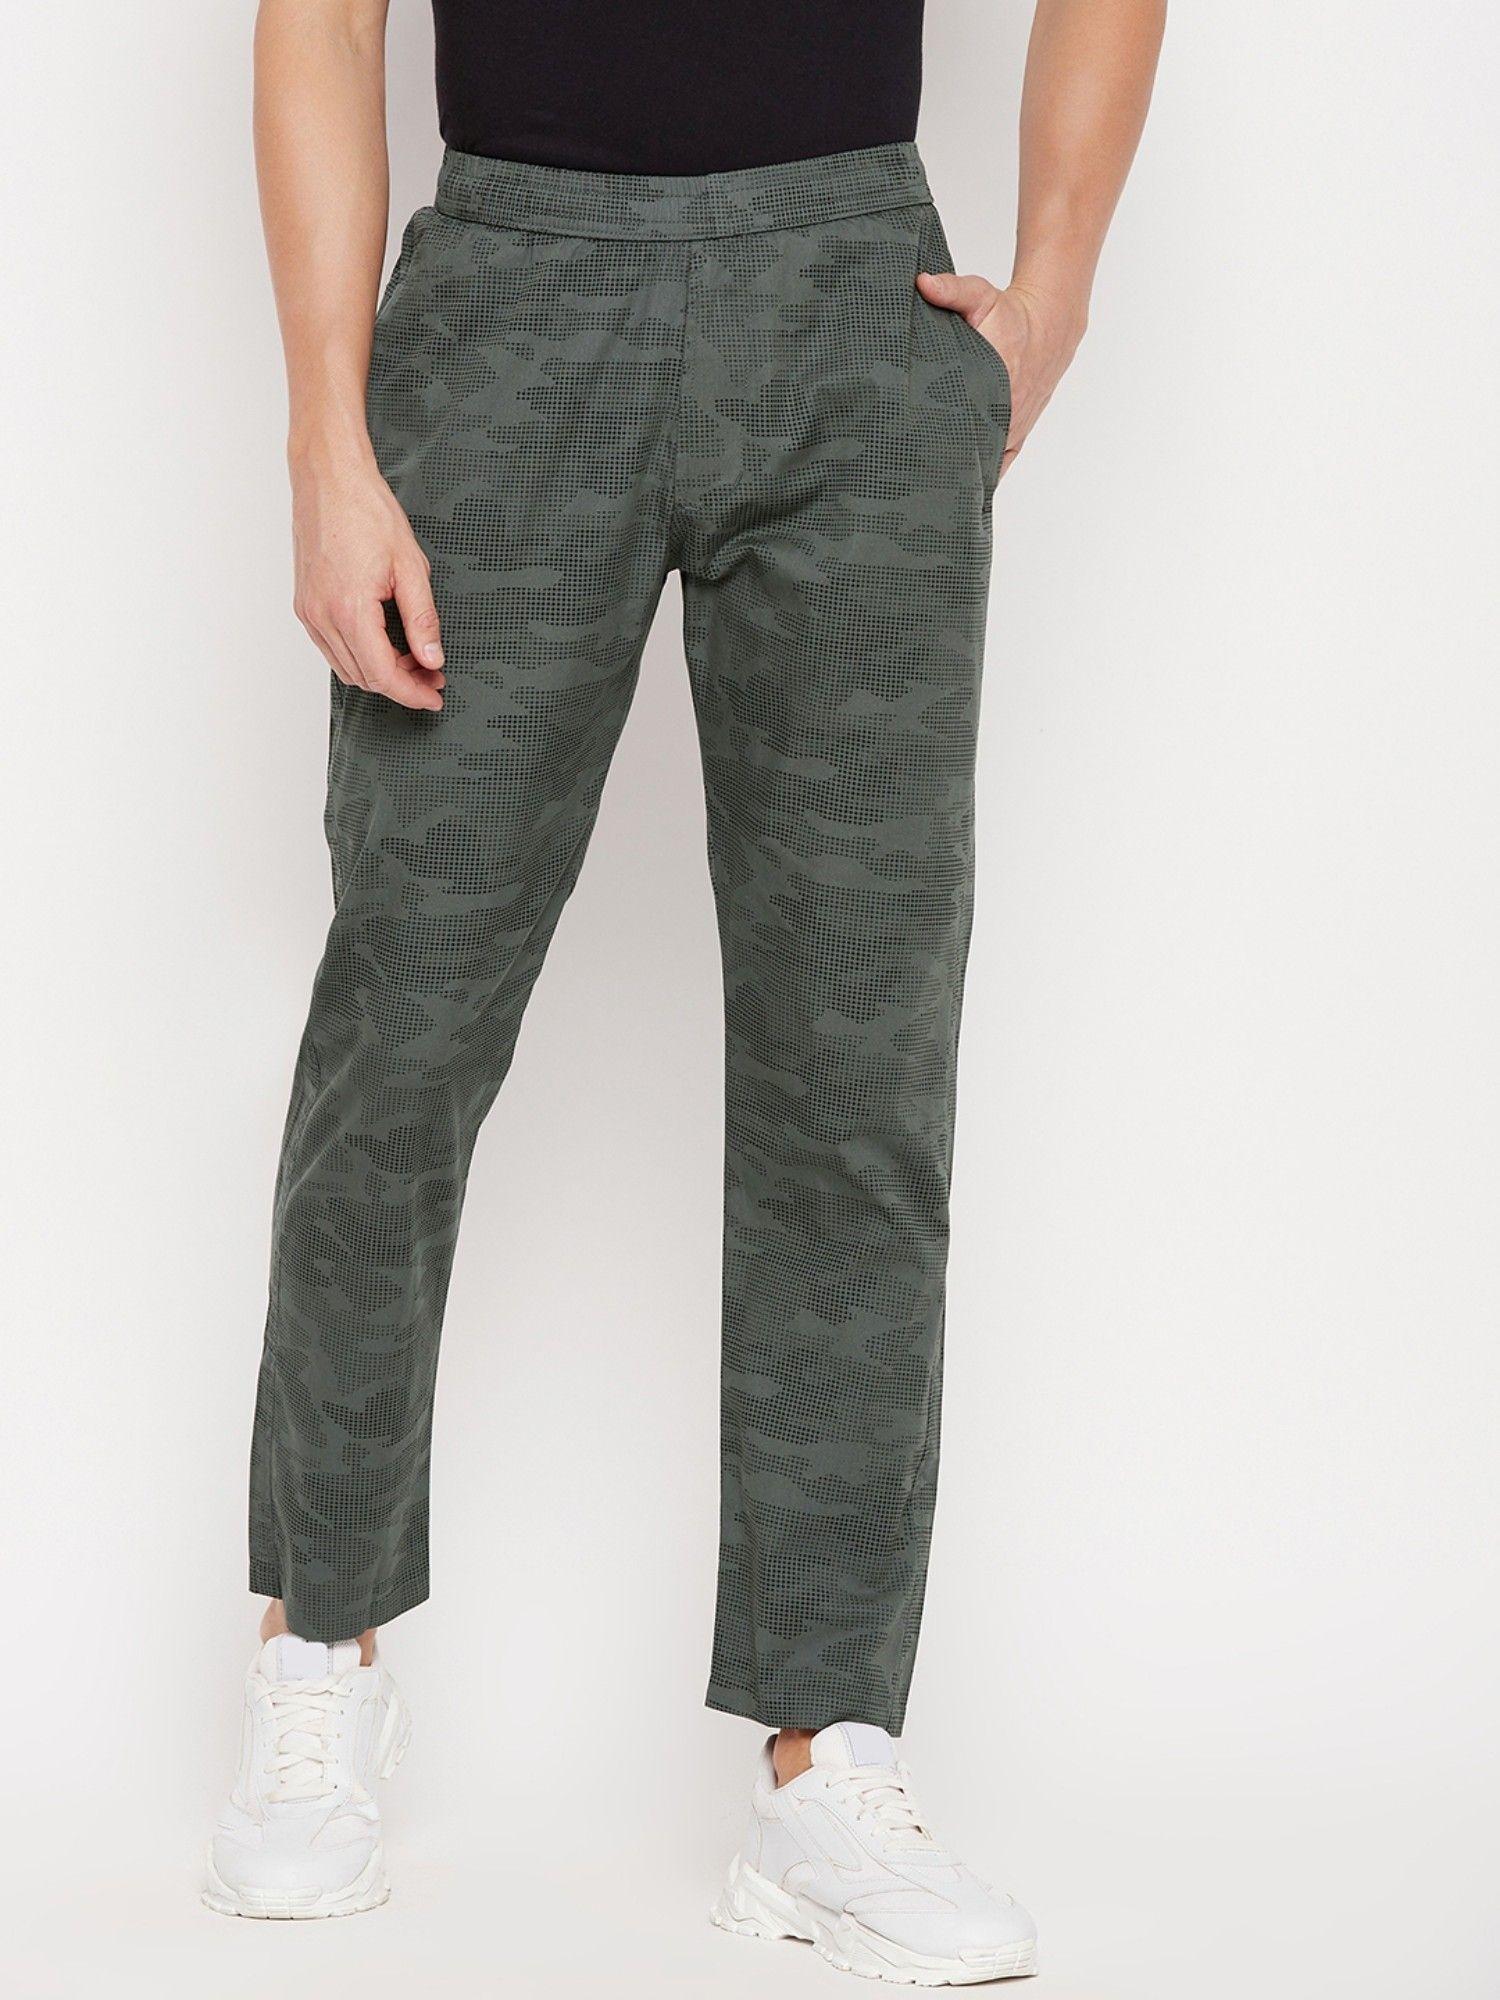 mens grey camouflage track pant